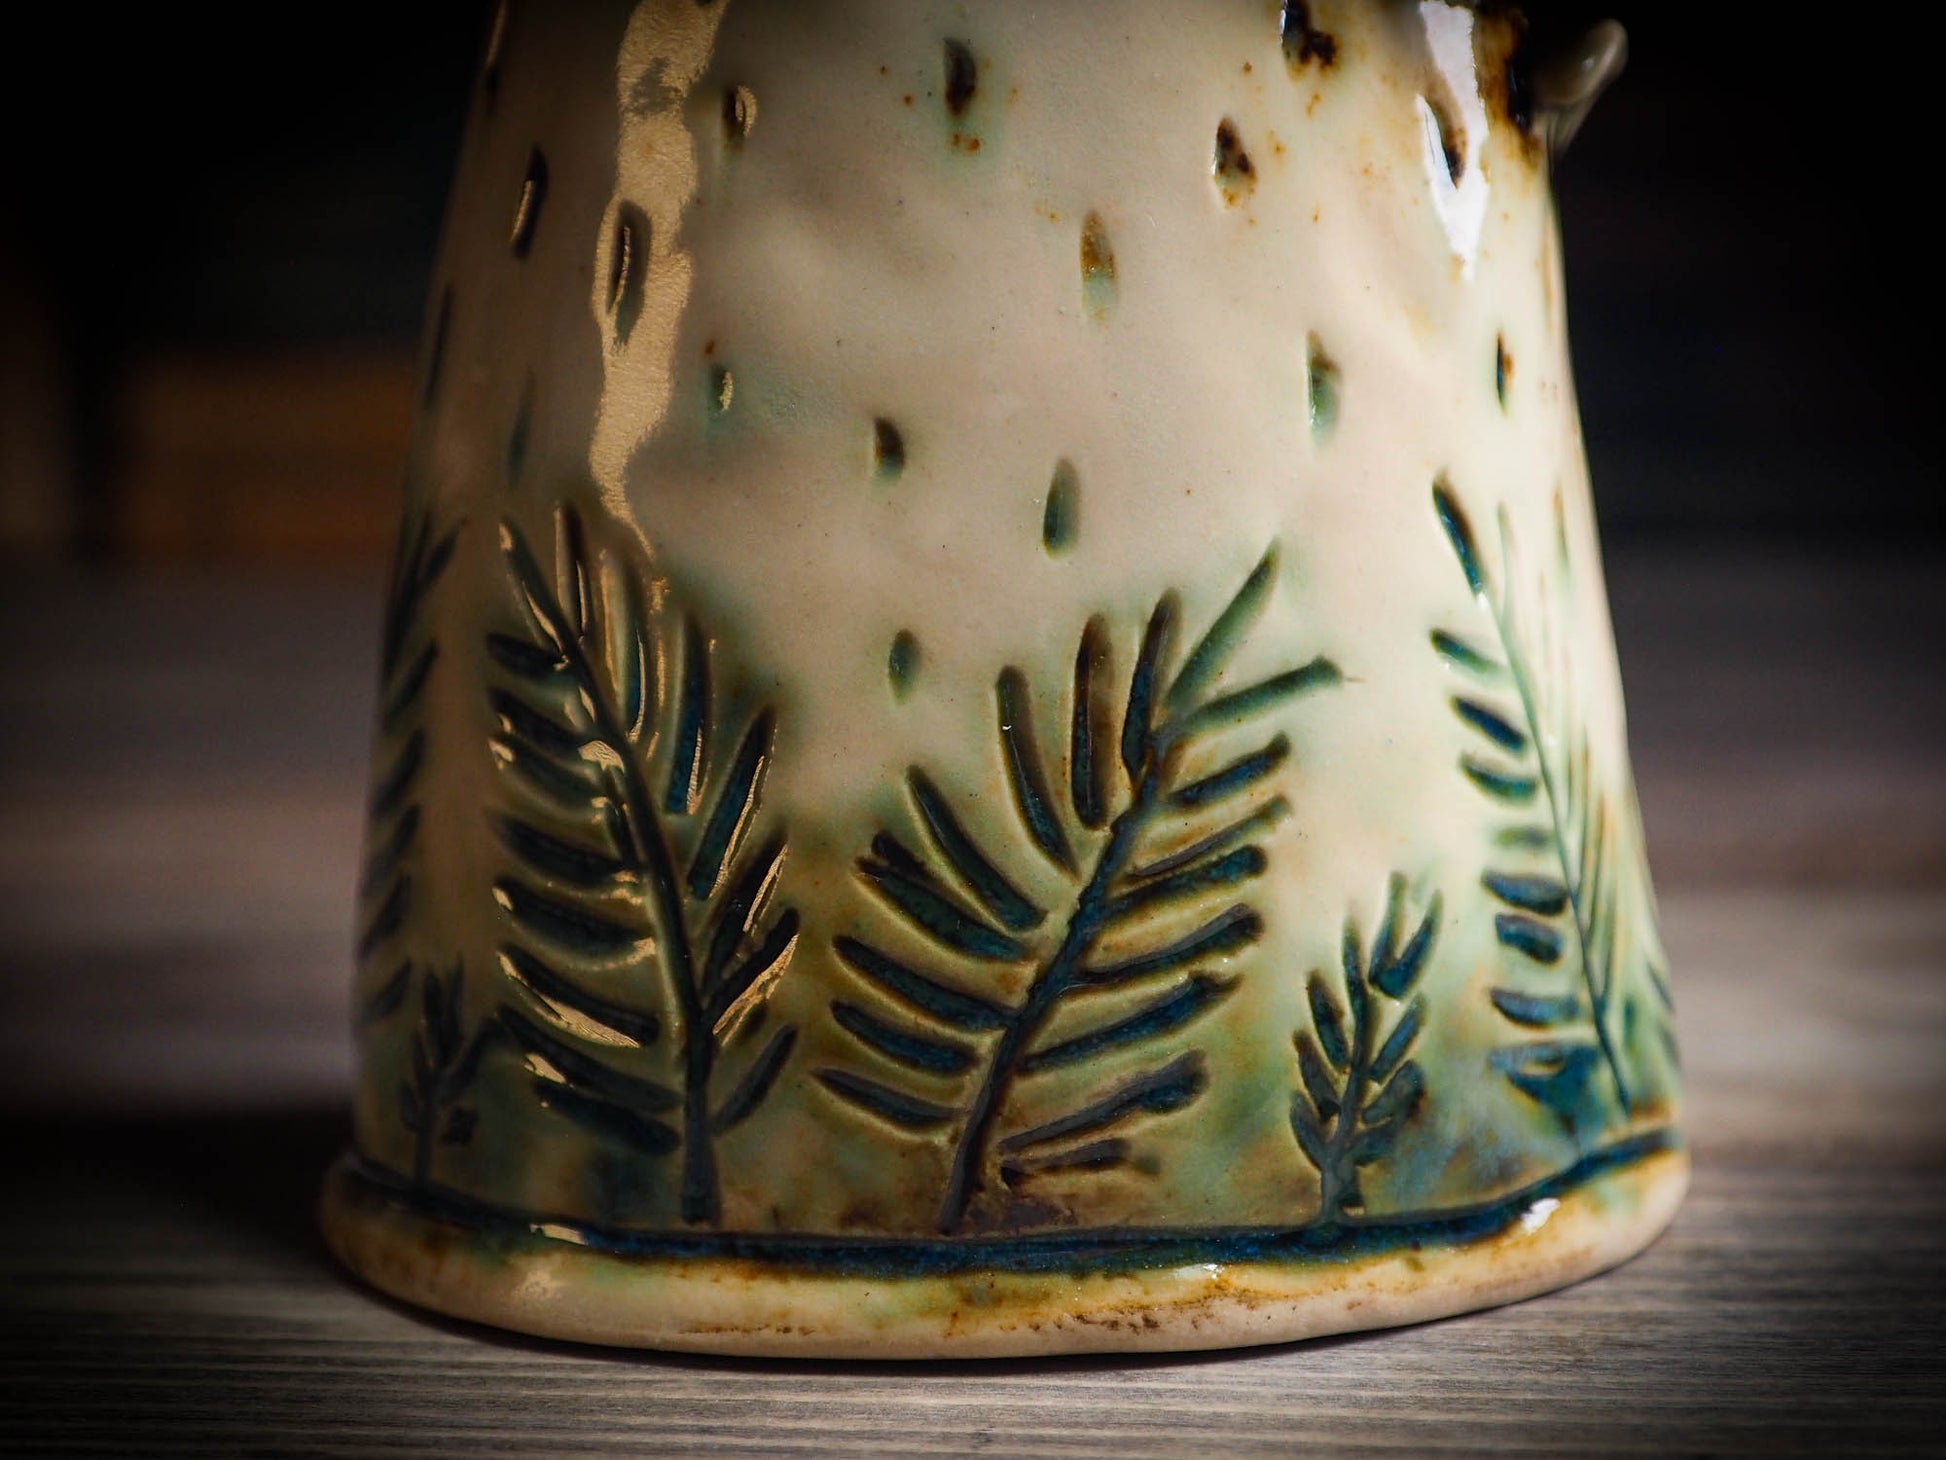 A beautiful original ceramic sculpture by idania salcido the artist behind Danita Art. Created with hand build techniques by the hands of the artists, this pieces is inspired by the mushrooms growing in the beautiful woodlands and forests of her imagination.